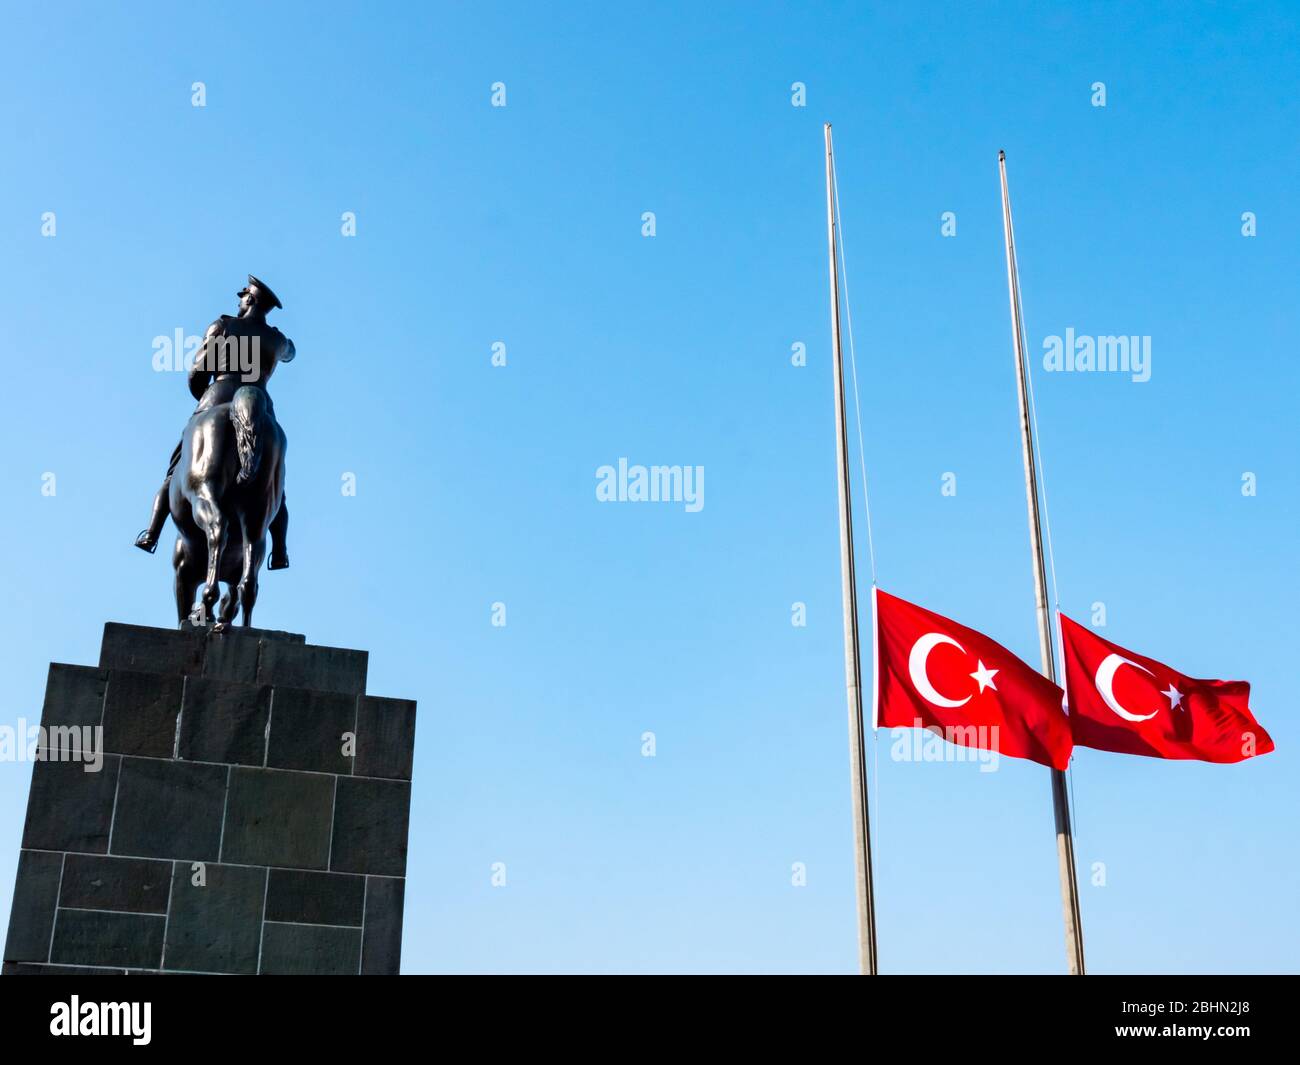 Mustafa Kemal Ataturk riding horse sculpture silhouette and Turkish flag, lower the flag to half-staff in 10 november. Stock Photo